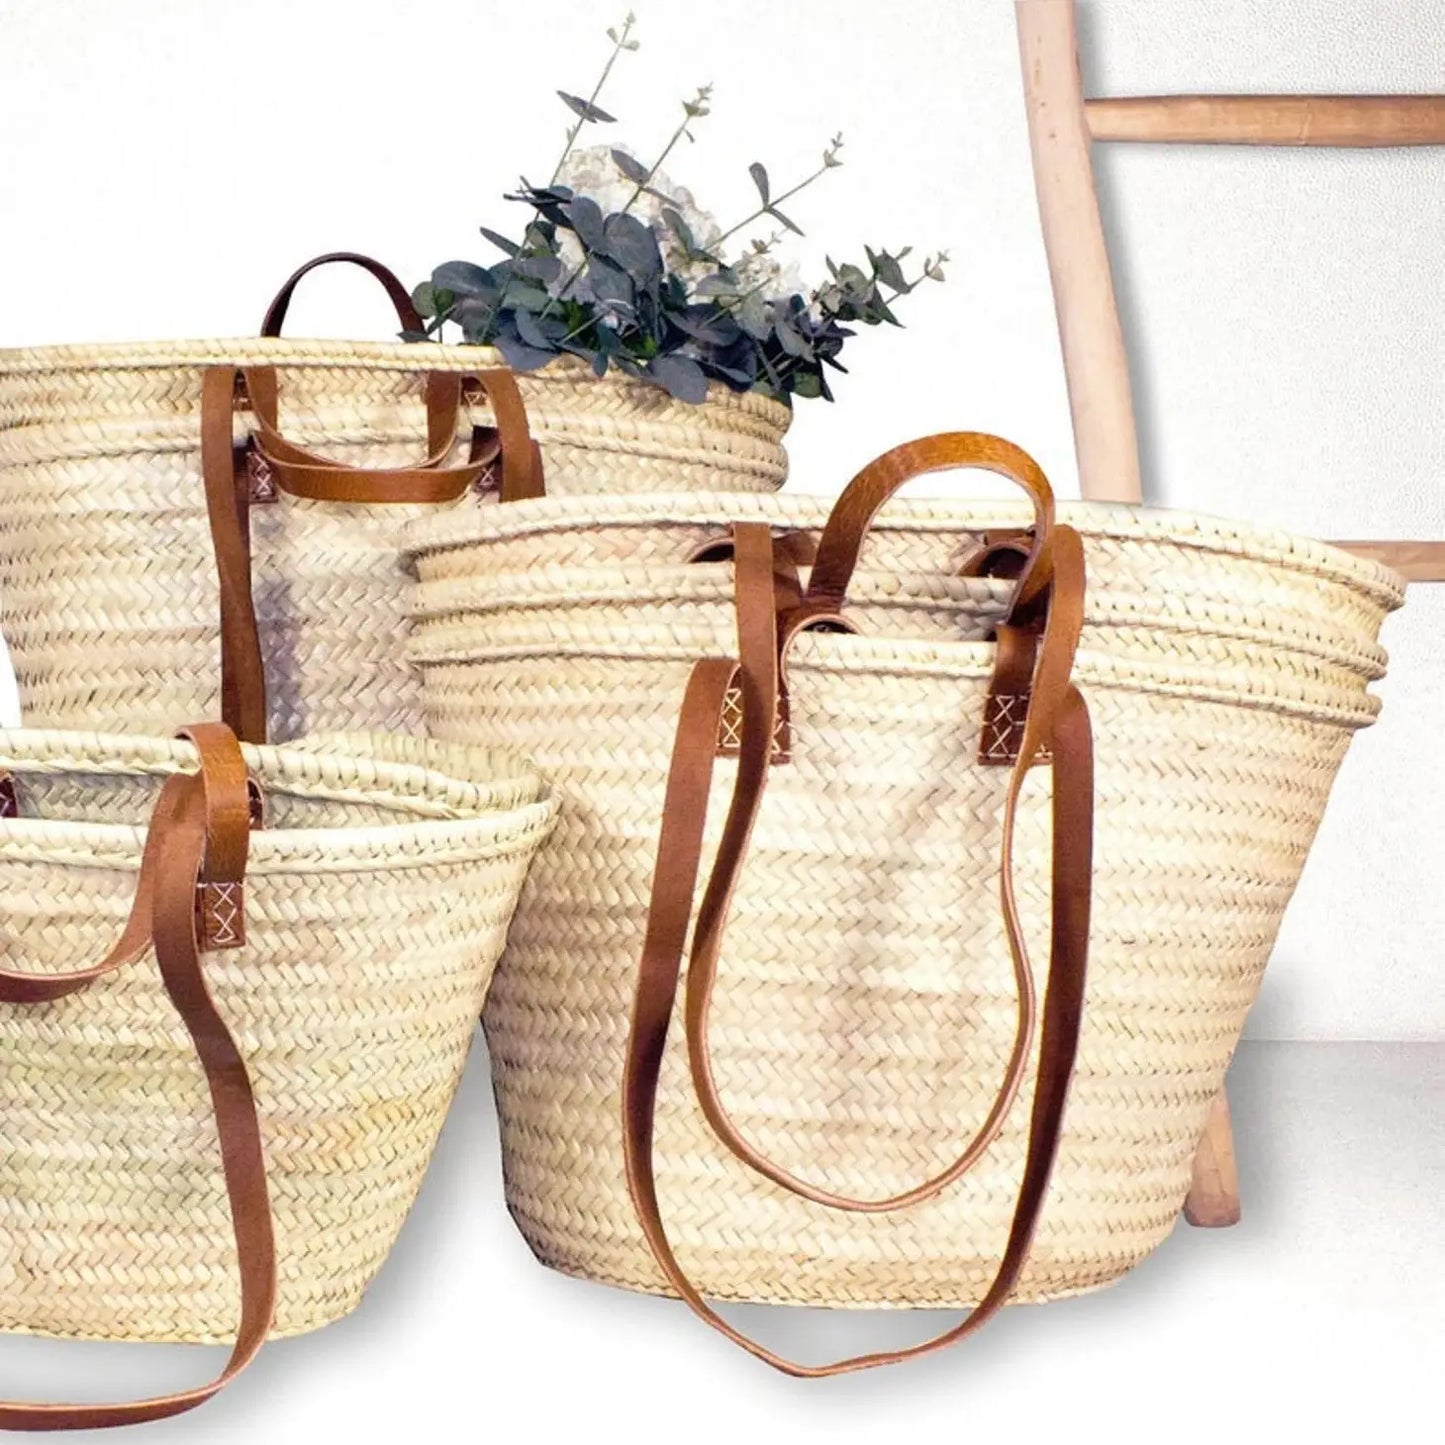 Straw Bag Handmade with Leather, French Market Basket